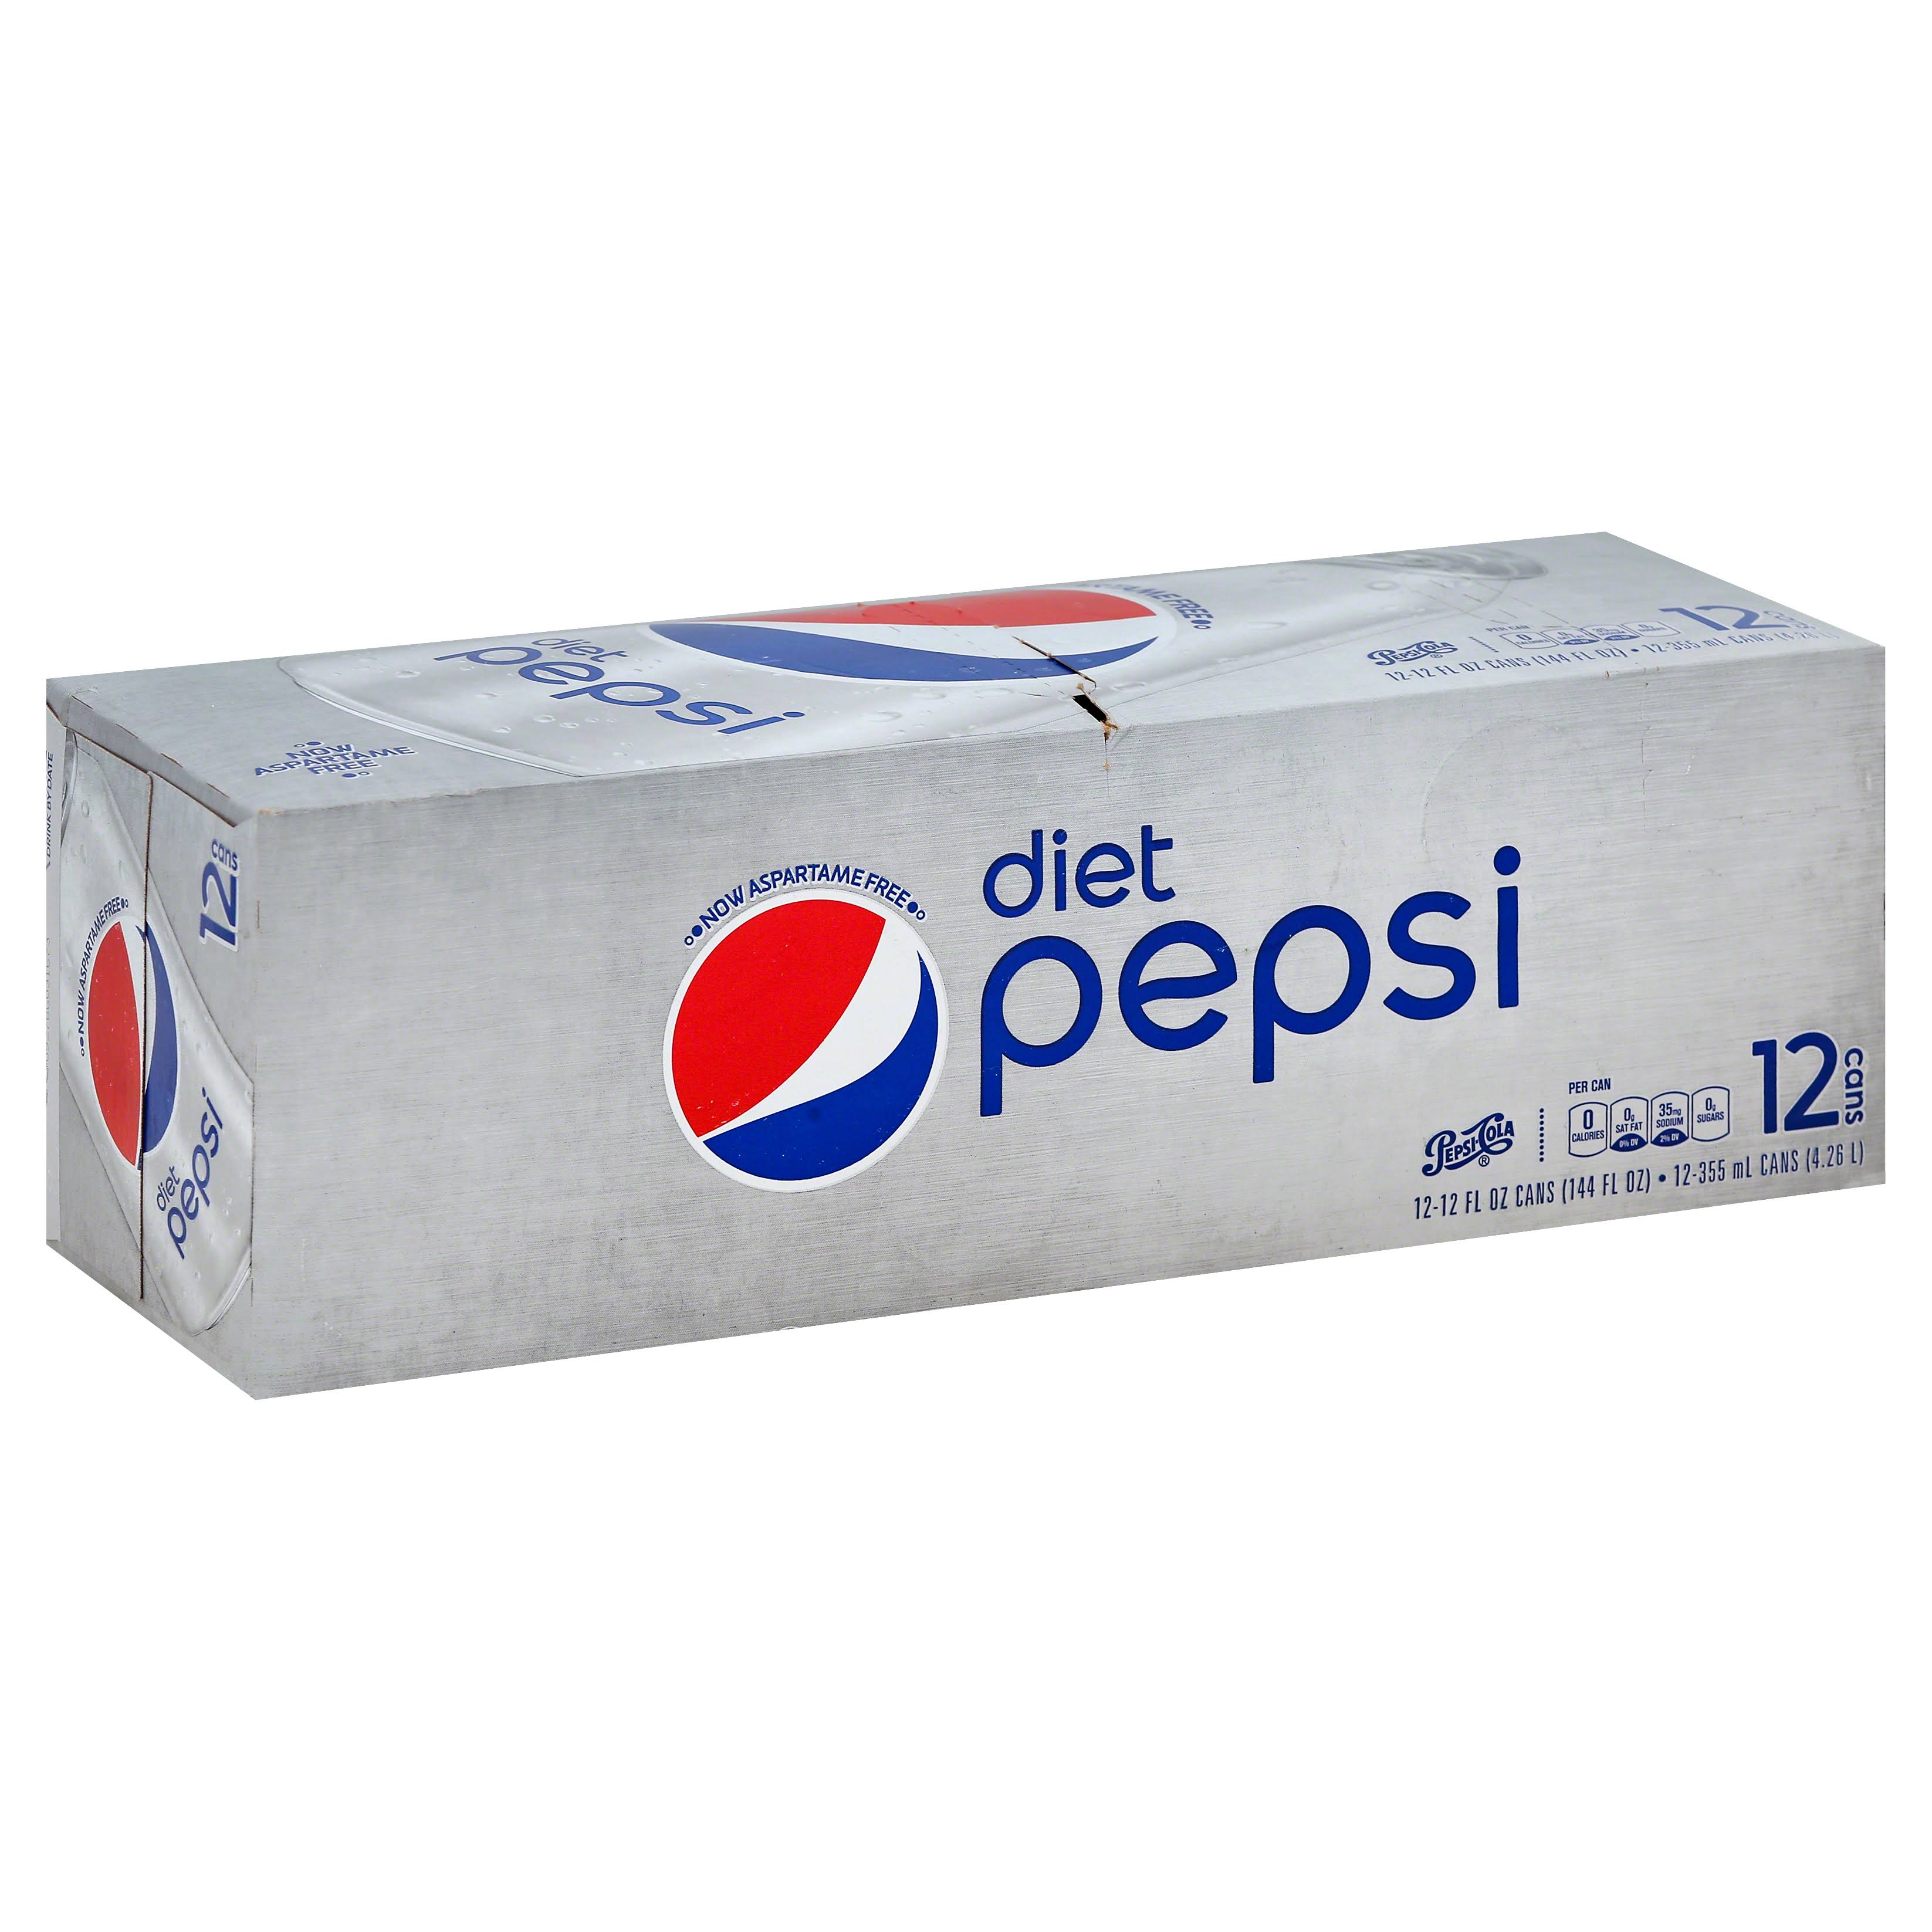 Pepsi Diet Pepsi Cola Canned Soda - 12 Cans